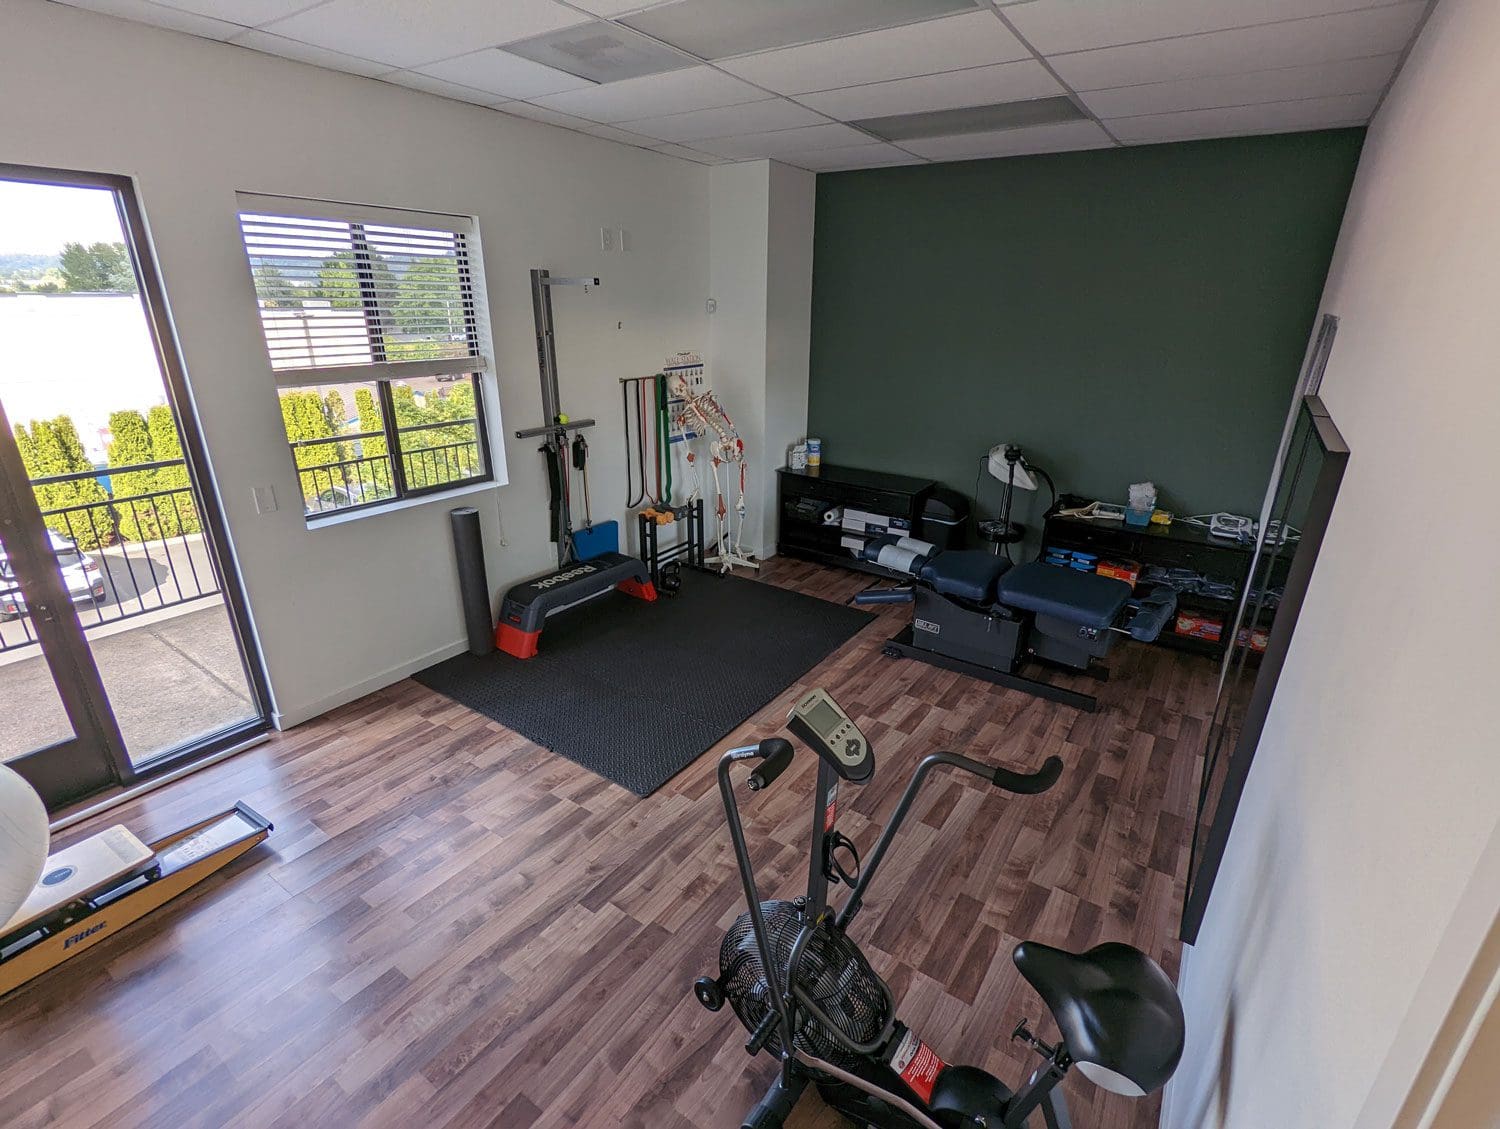 Tigard Chiropractor rehabilitation room with exercise and physical therapy equipment.